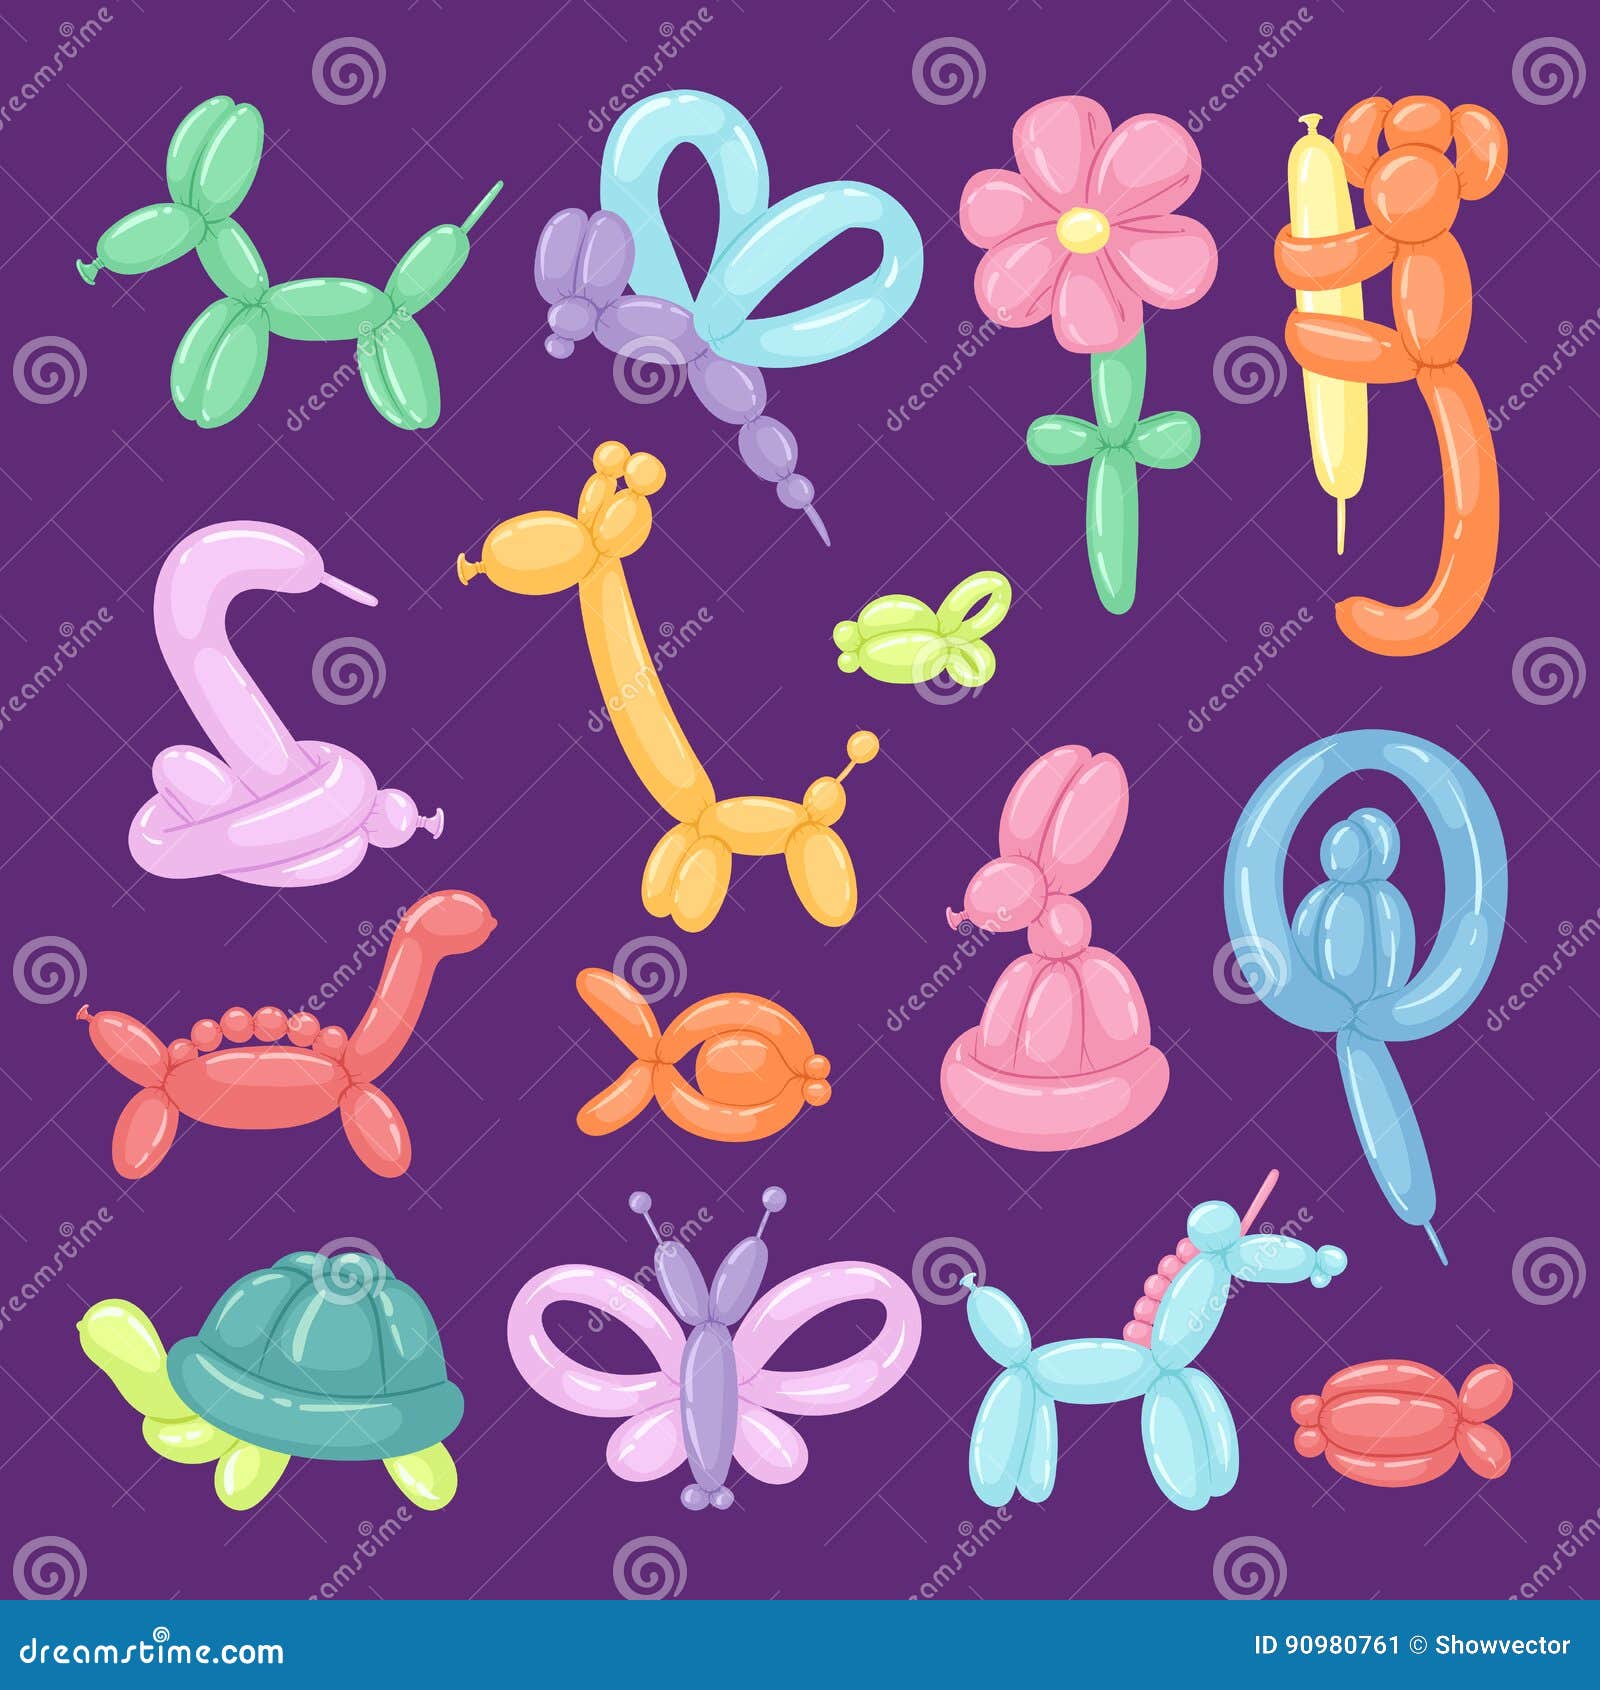 Balloon Animals Vector Illustration Cartoon Set Festive Present Rounded  Birthday Games Colorful Toy. Stock Vector - Illustration of horse, bubbles:  90980761